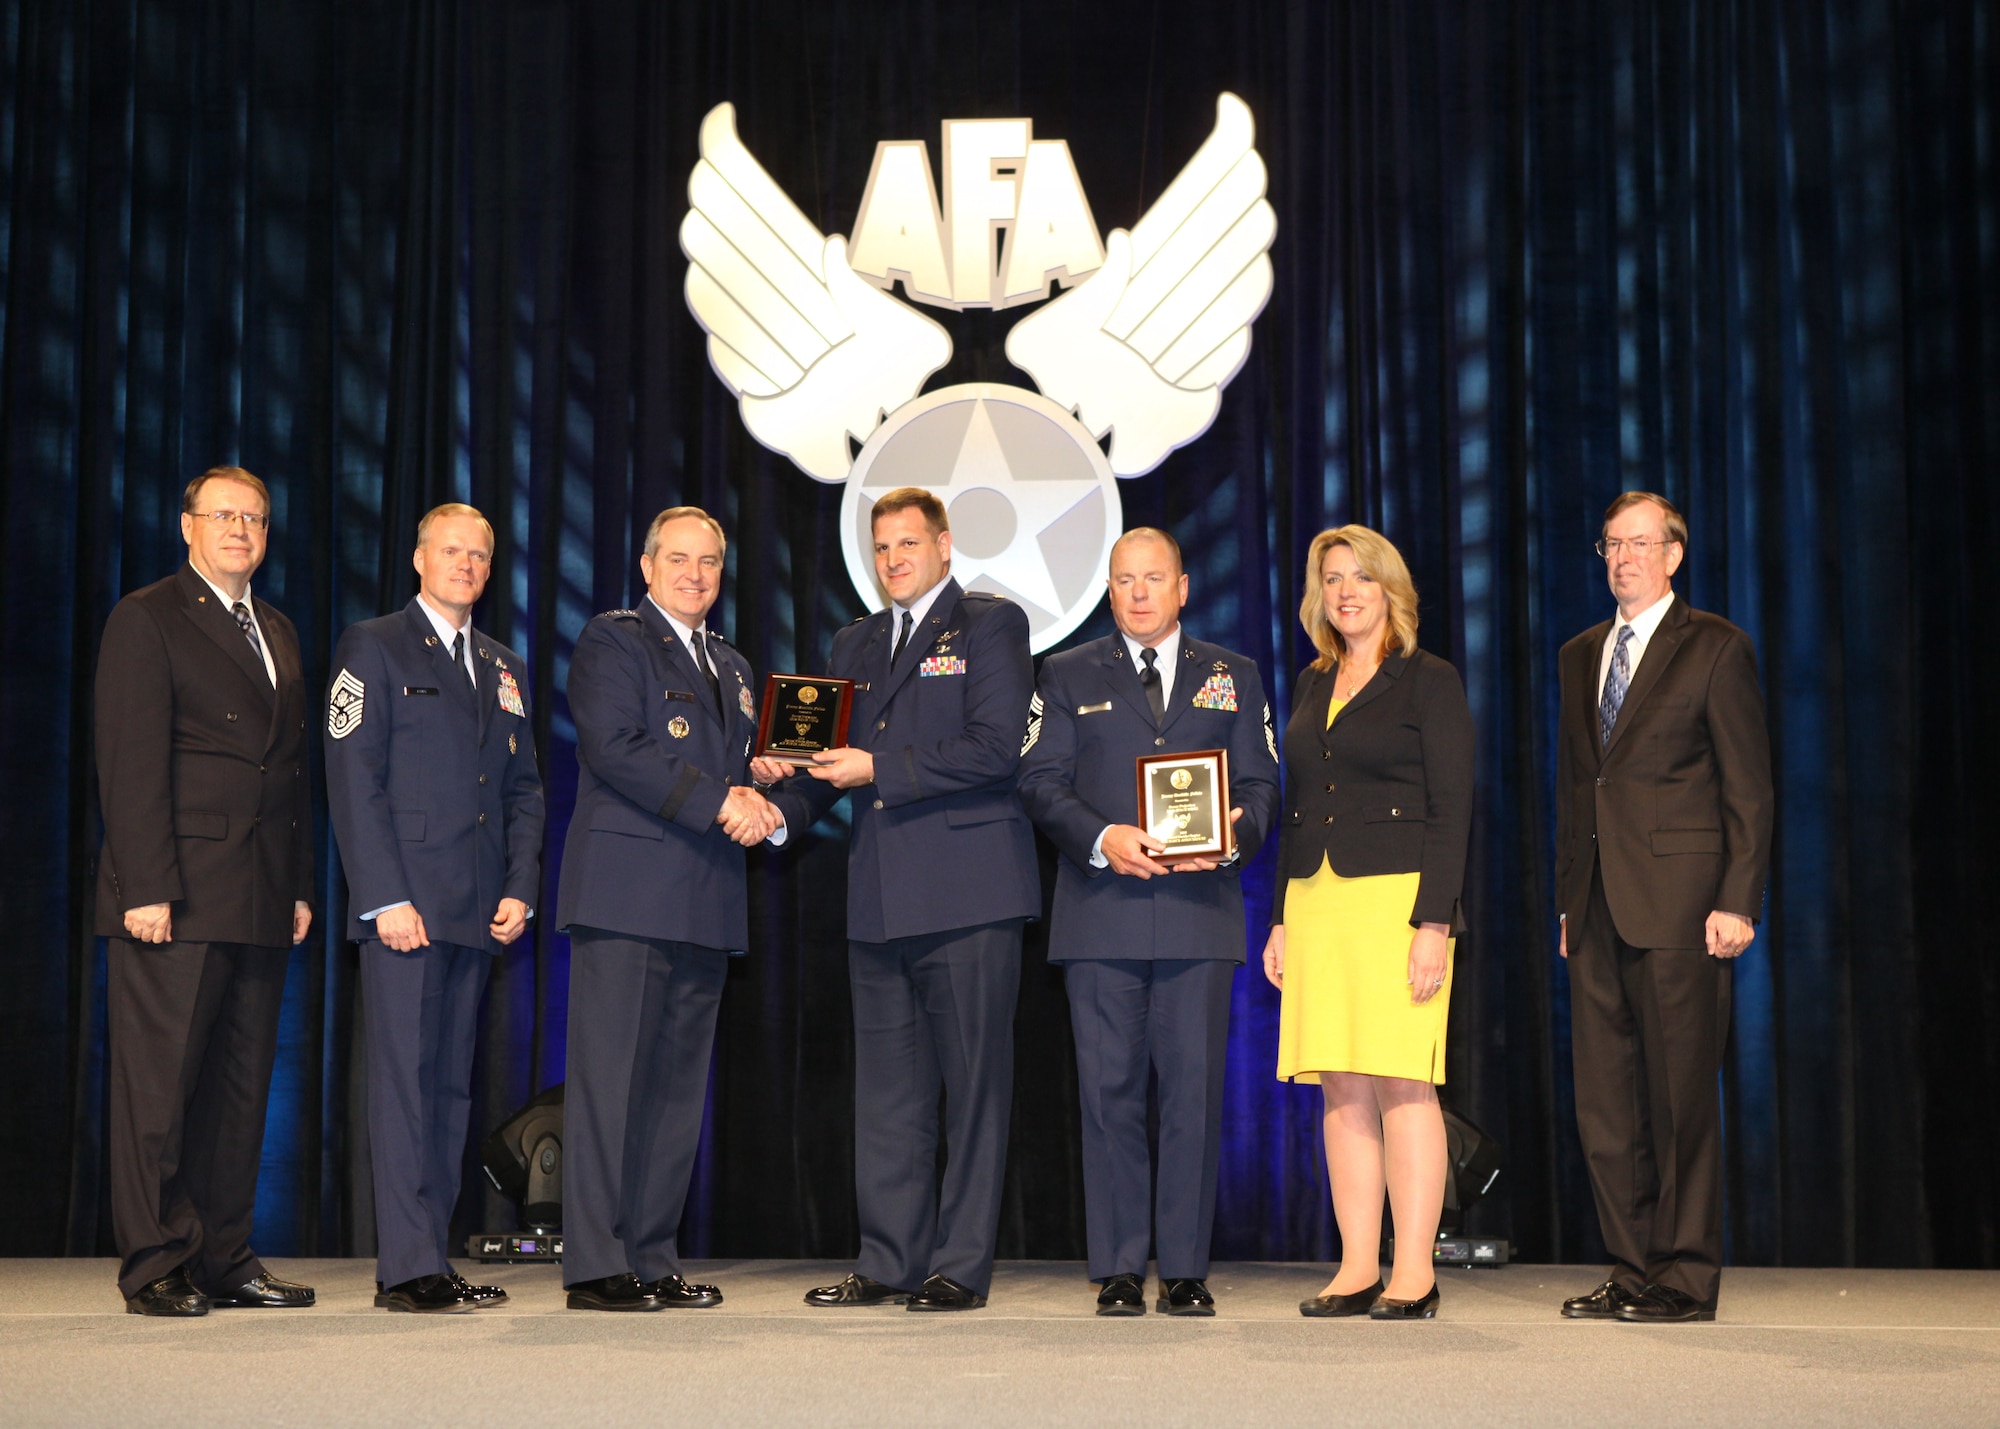 Accepting the Jimmy Doolittle Educational Fellow for Power Projection is Maj. Michael Belardo, B-2 Weapons Officer, 131st Bomb Wing, Missouri Air National Guard.  Air Force Chief of Staff Gen. Mark A. Welsh III presented the award at the AF Gala, Feb 20, 2014, in Orlando, Fl. Welsh and Belardo were joined by (R to L) AFA Central Florida Chapter President Bill Palmby, Secretary of the Air Force Deborah Lee James, Chief Master Sergeant Gary Brown, Chief Master Sergeant of the Air Force James Cody and Air Force Gala Chairman Tim Brock.(Courtesy photo)